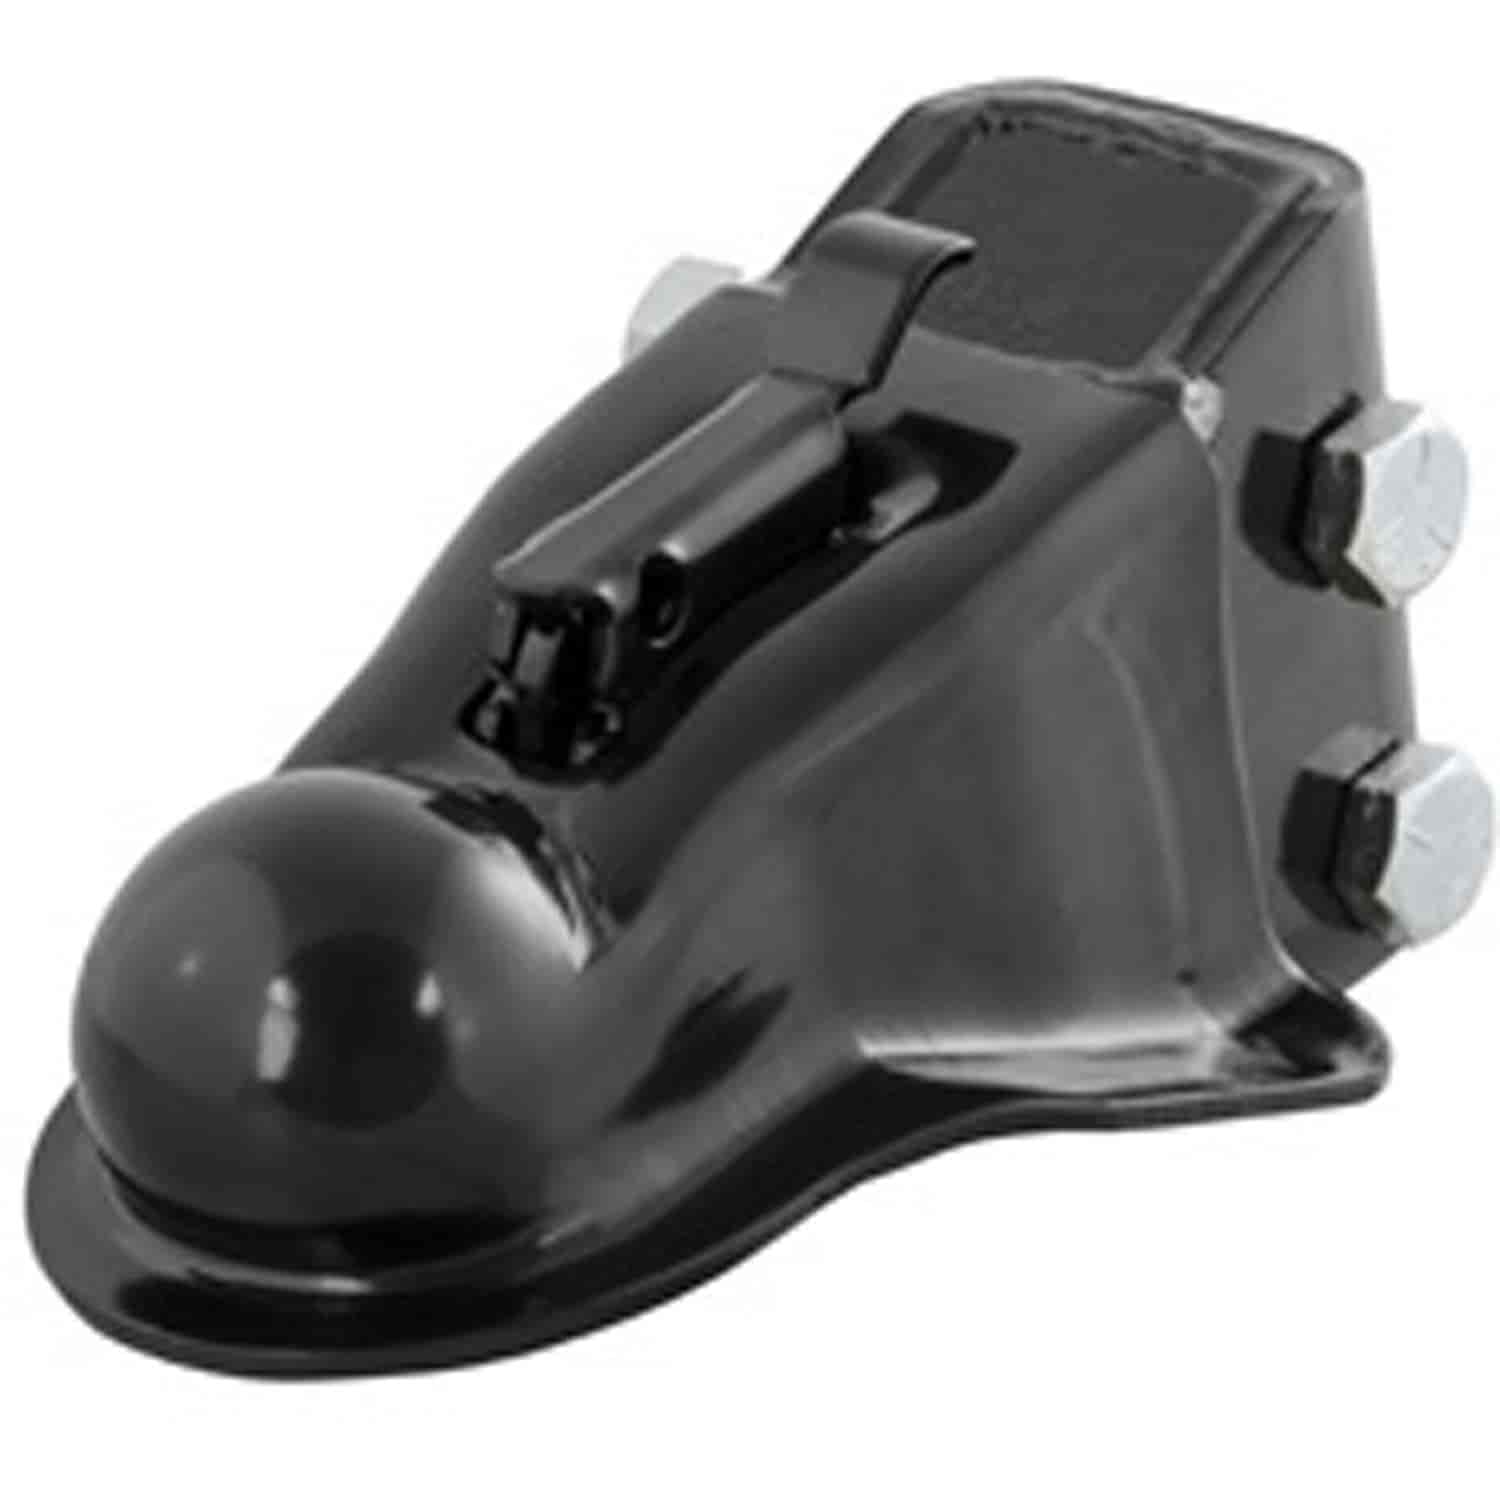 Channel-Mount Coupler with Easy Lock 14,000 lbs. Gross